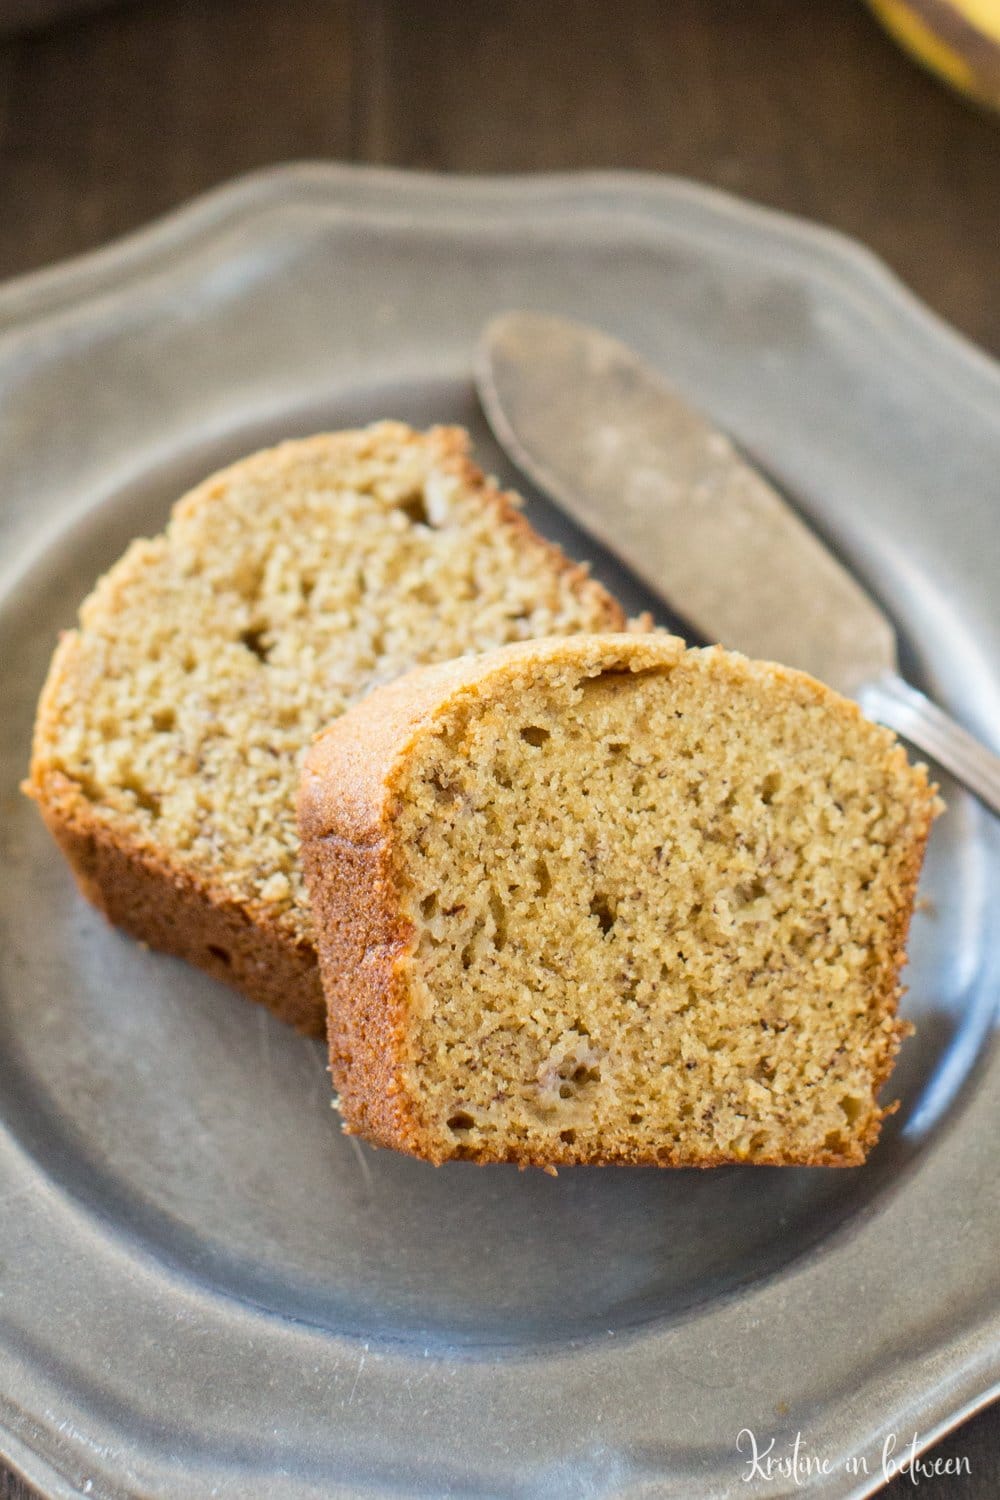 This is an old family recipe for traditional banana bread!